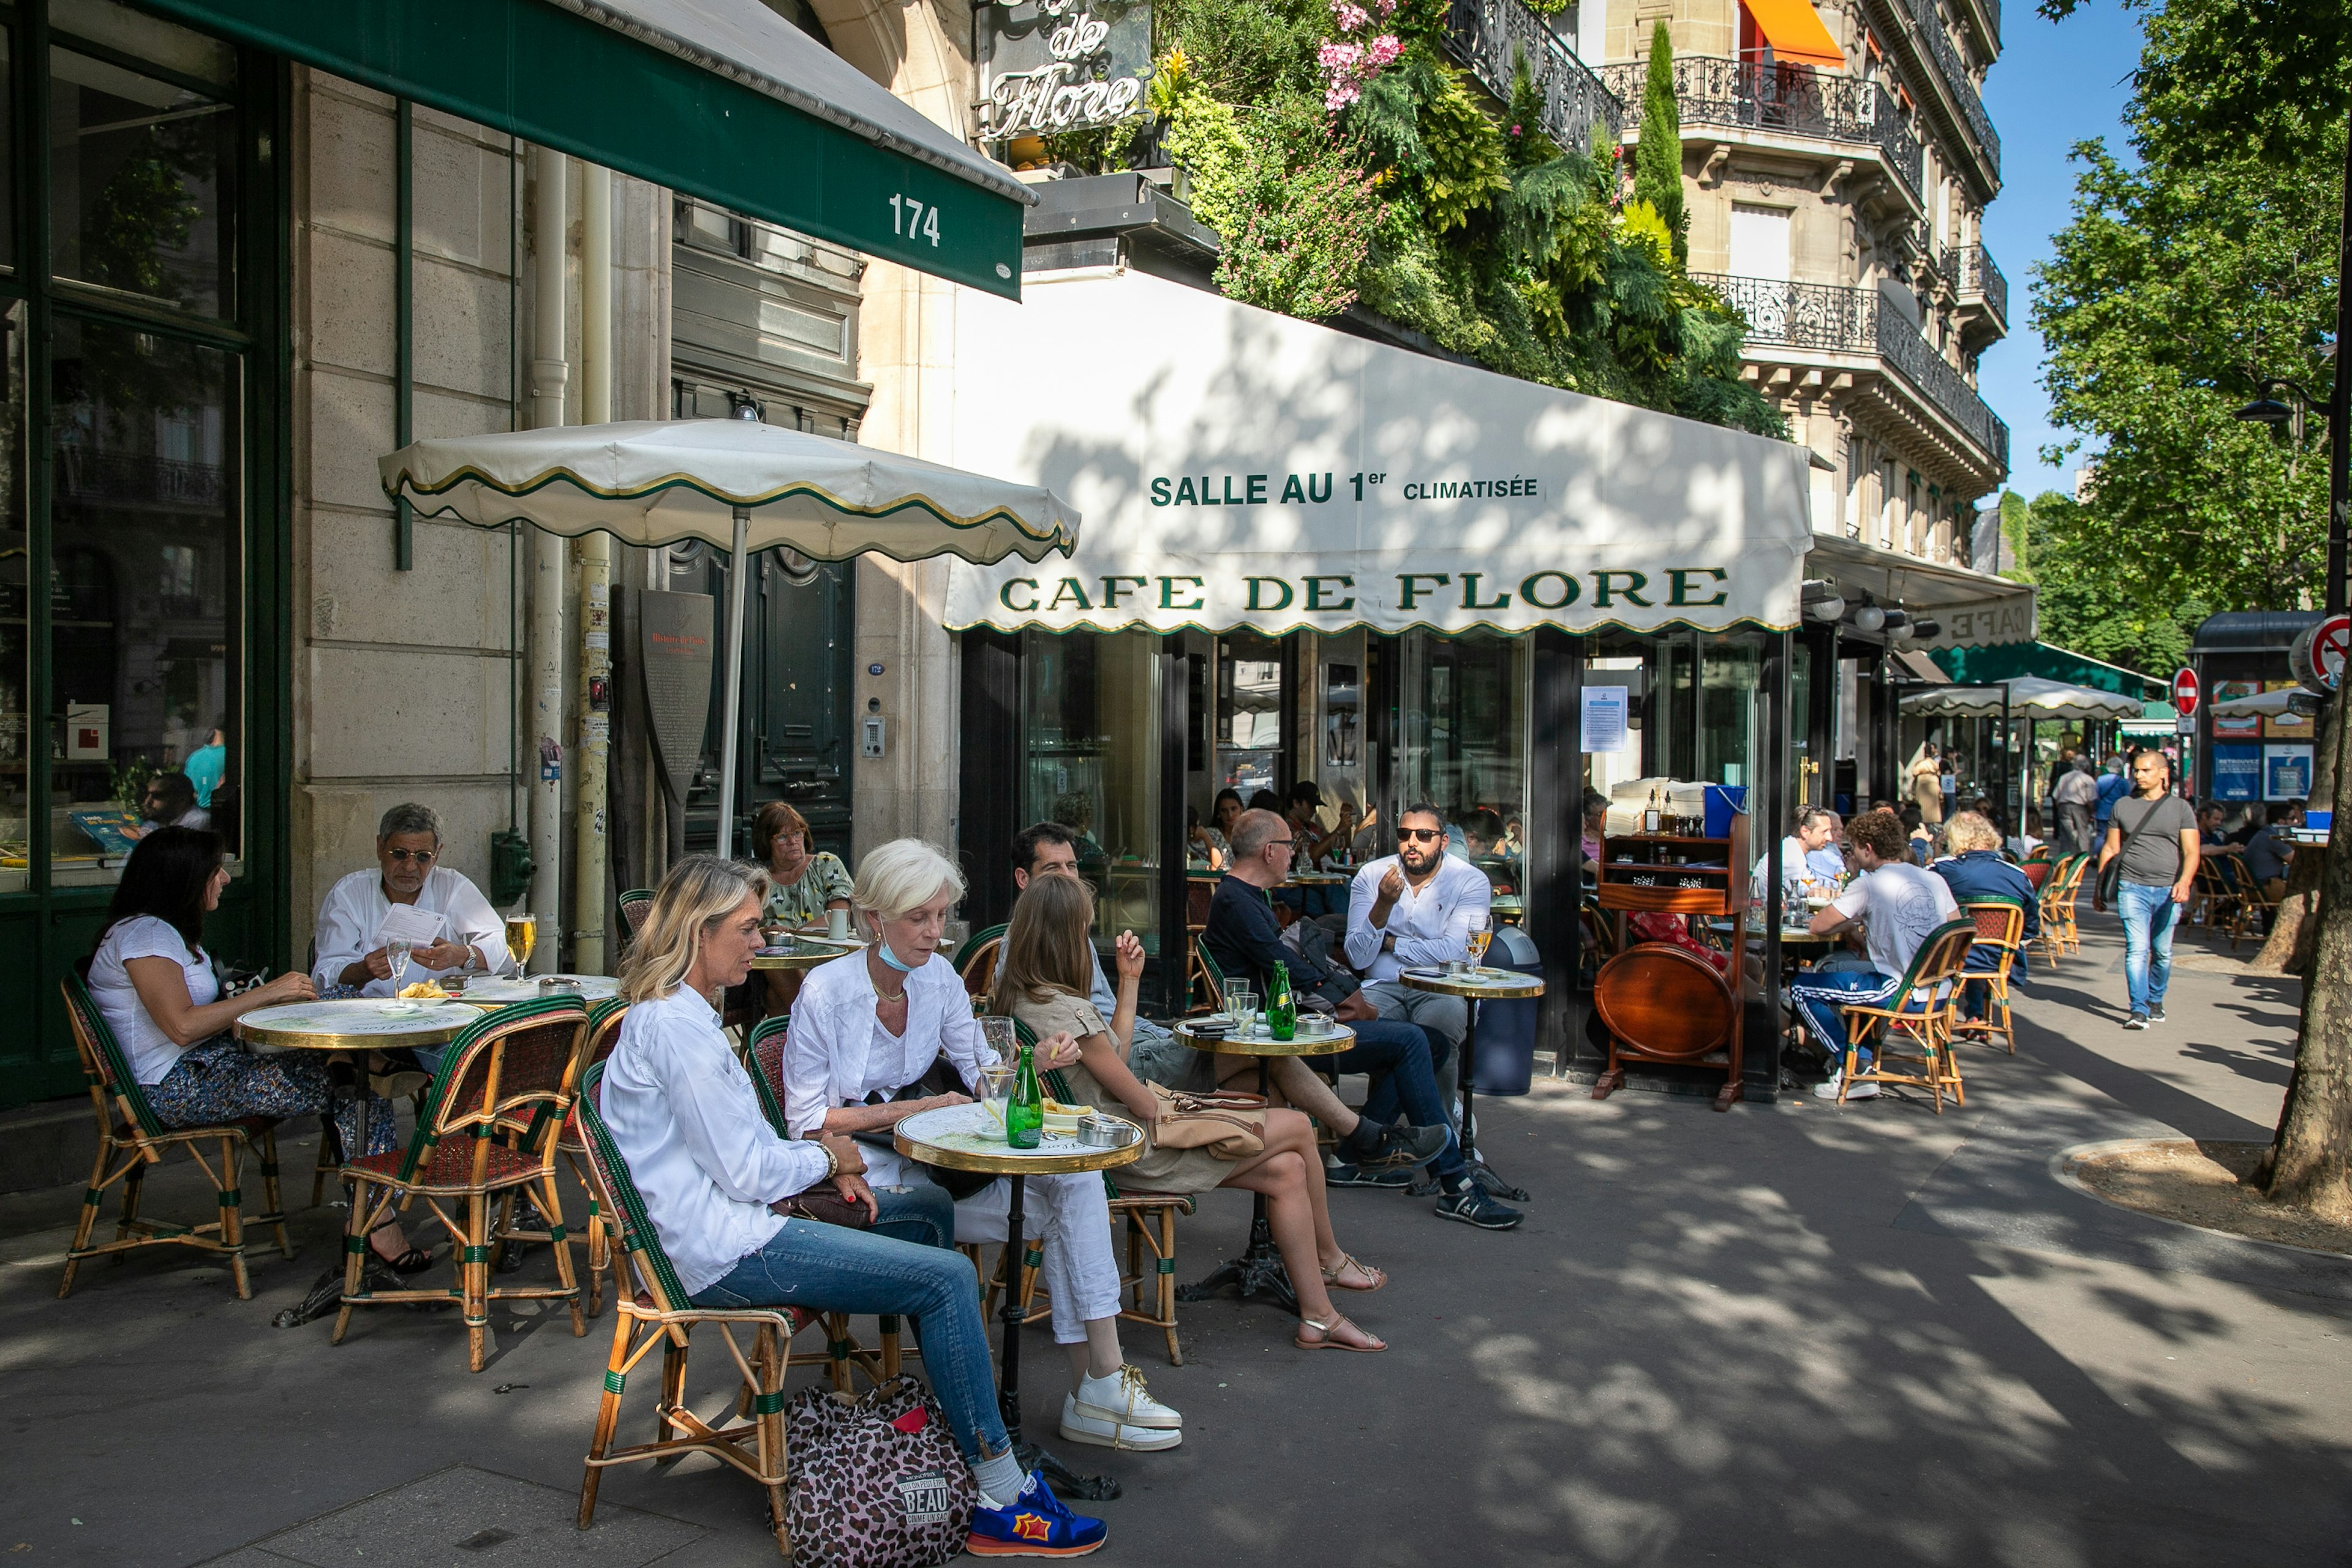 Paris moves its cafes and bistros to the streets - Lonely Planet